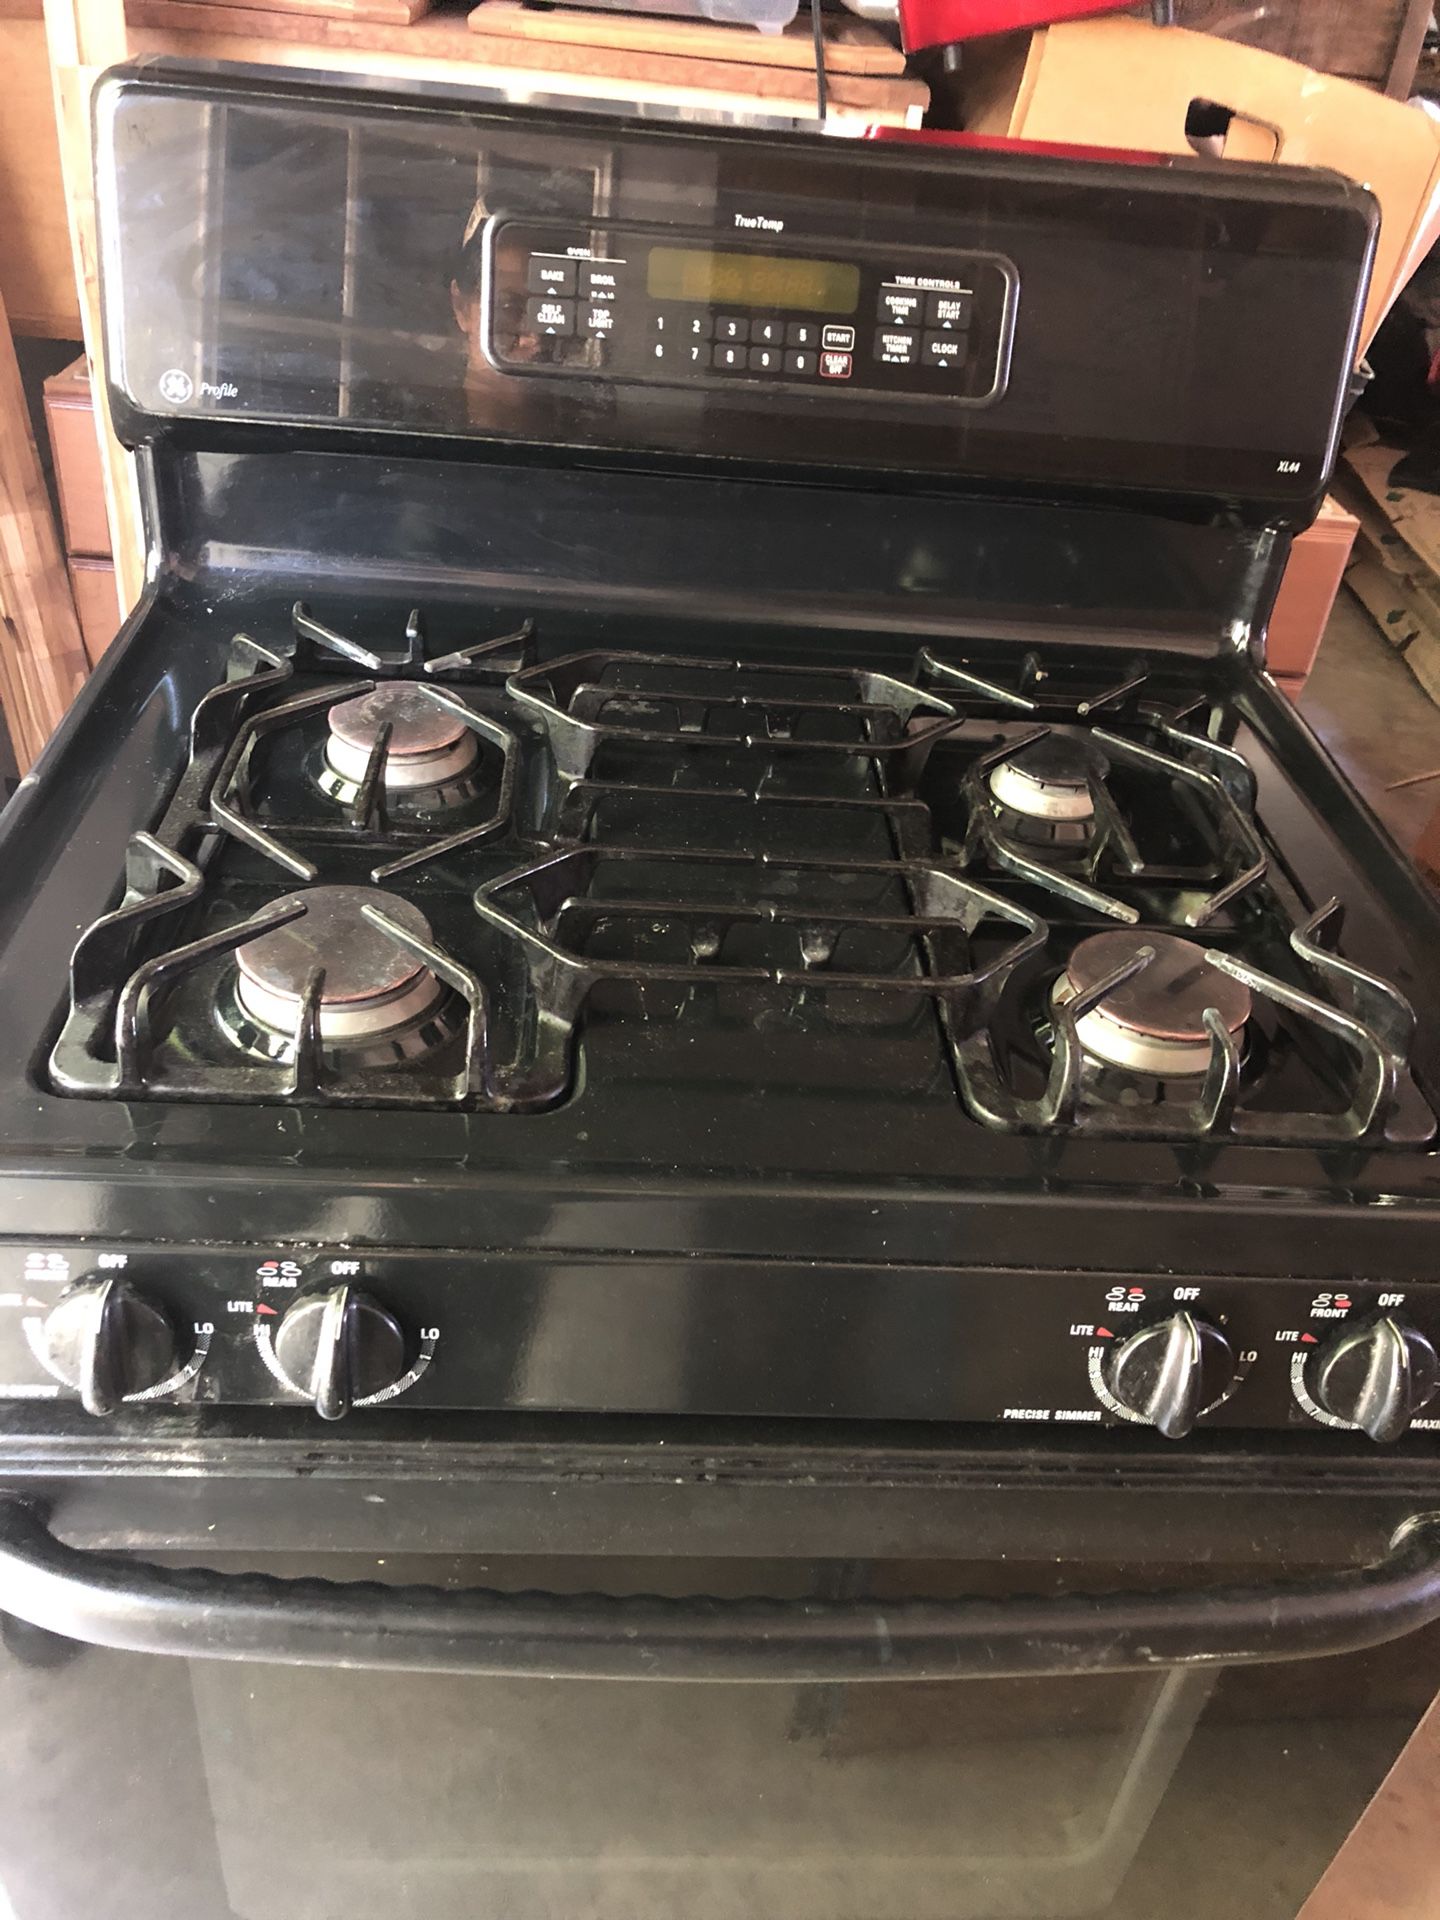 GE gas oven